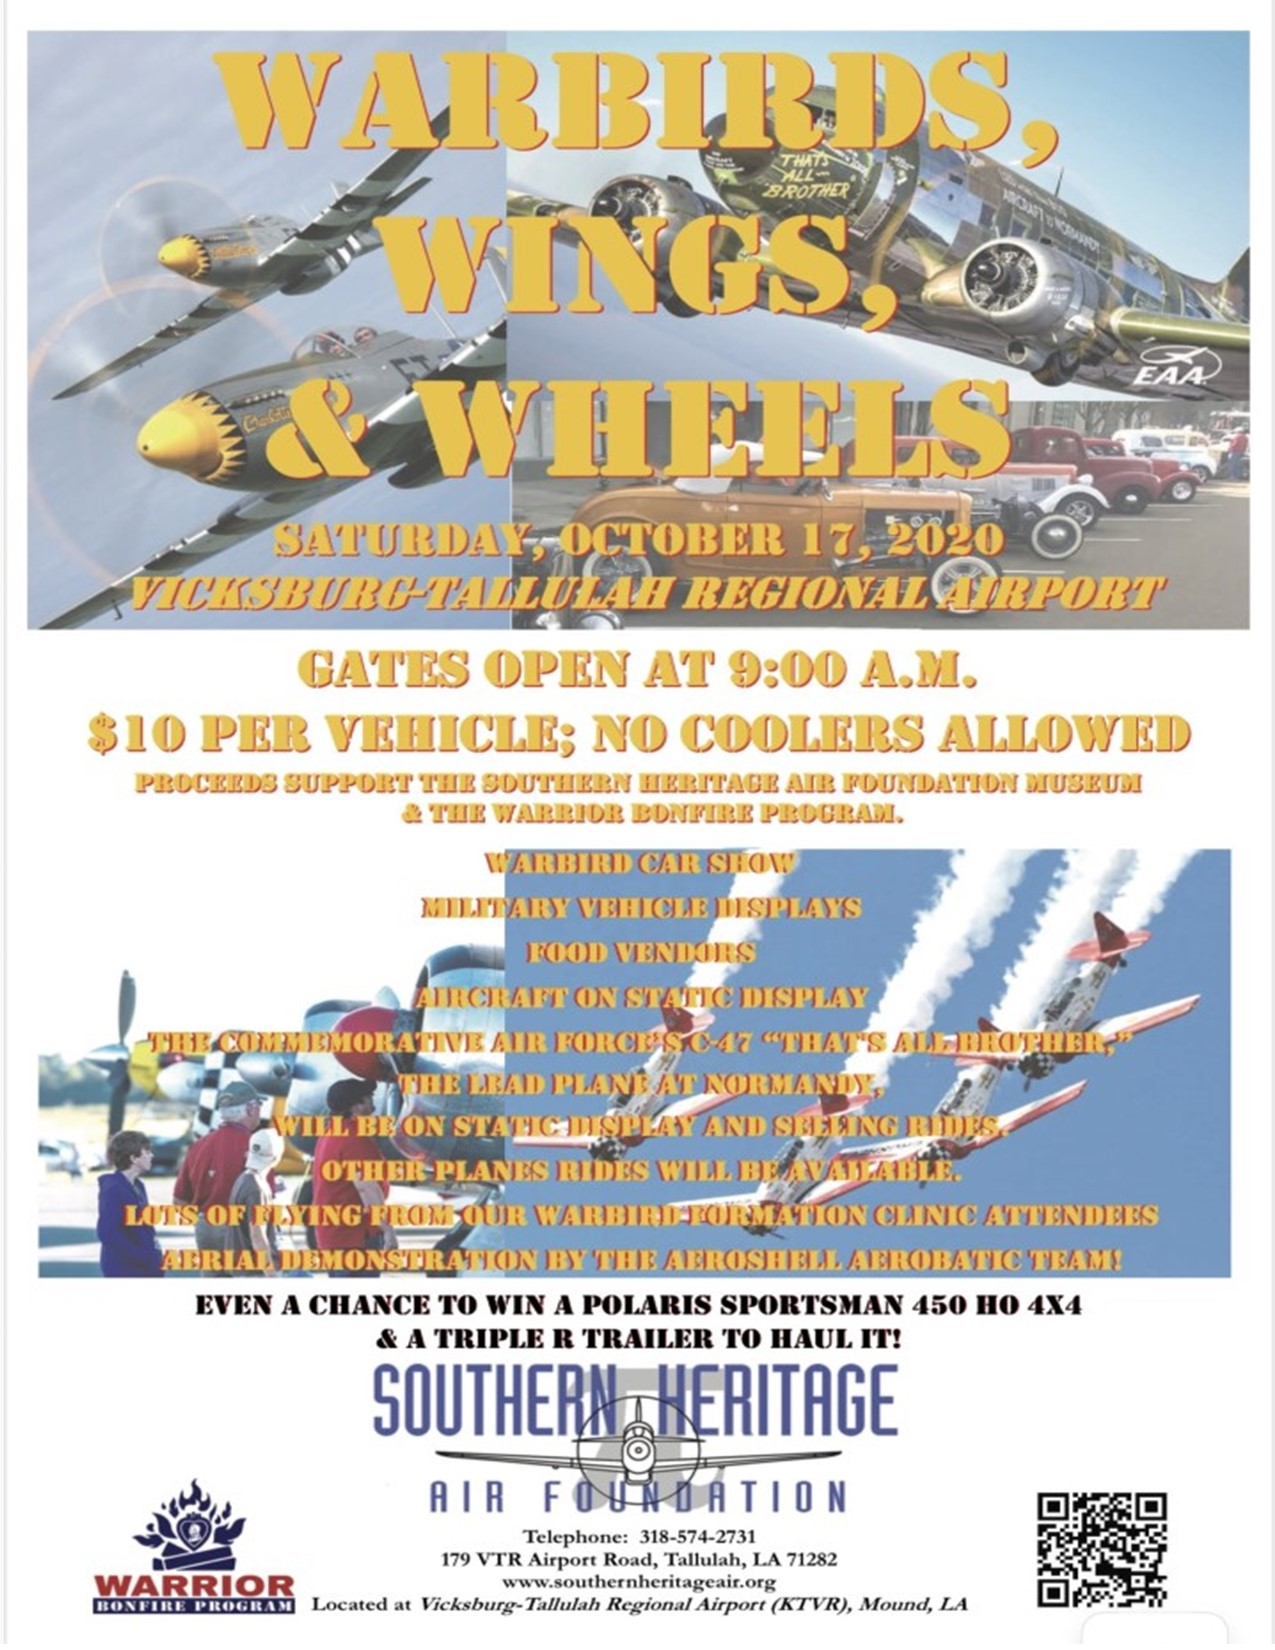 Southern Heritage Air Foundation Warbirds, Wings & Wheels EAA